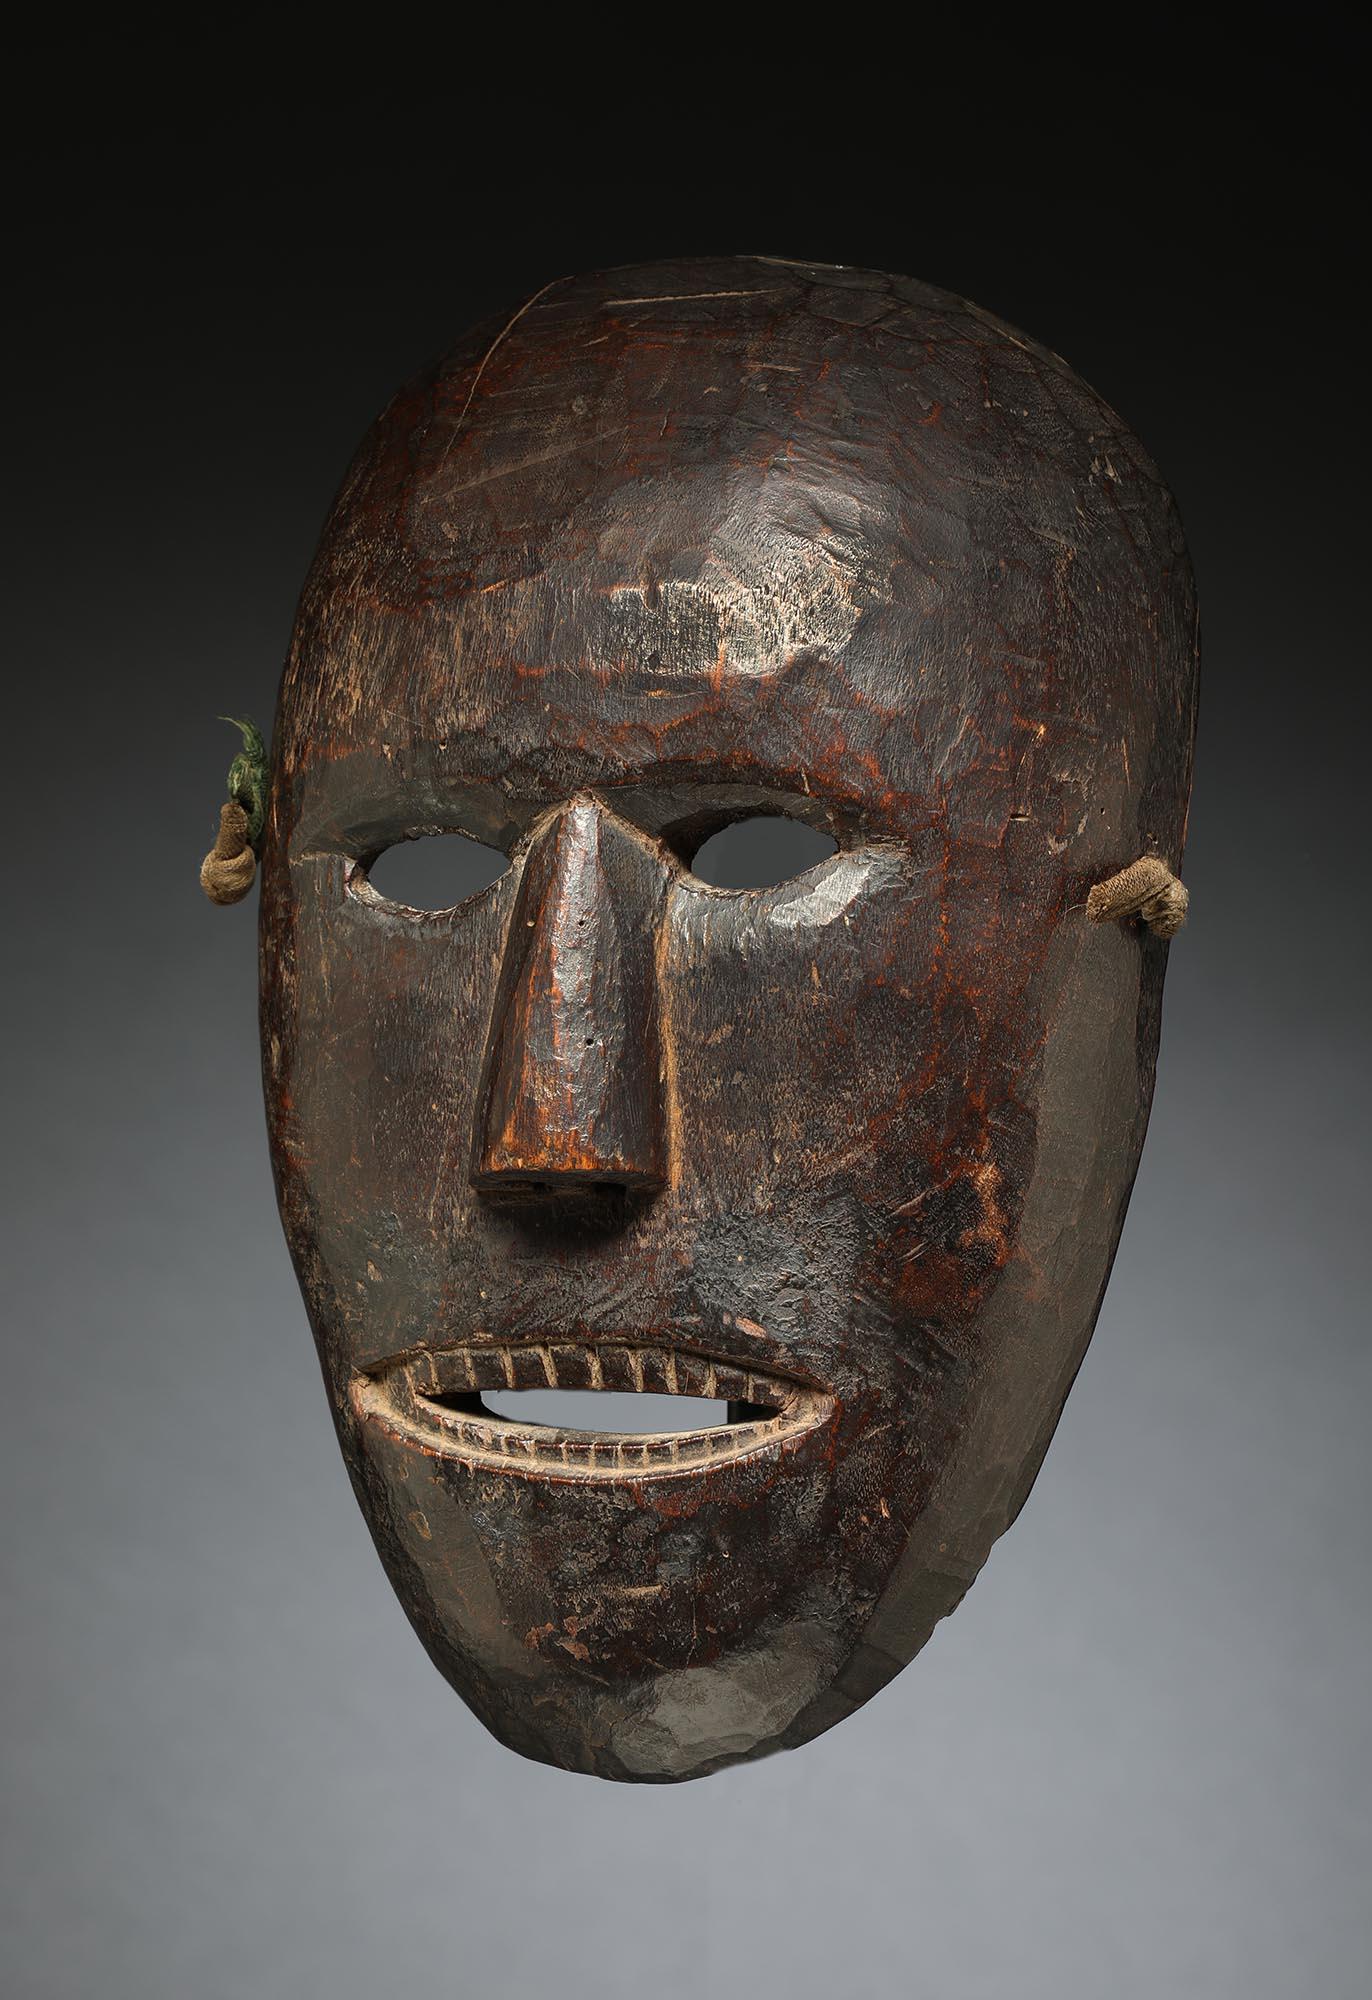 Hand-Carved Nepal Dance Mask Oval Face with Open Mouth Teeth, Late 19th-Early 20th Century